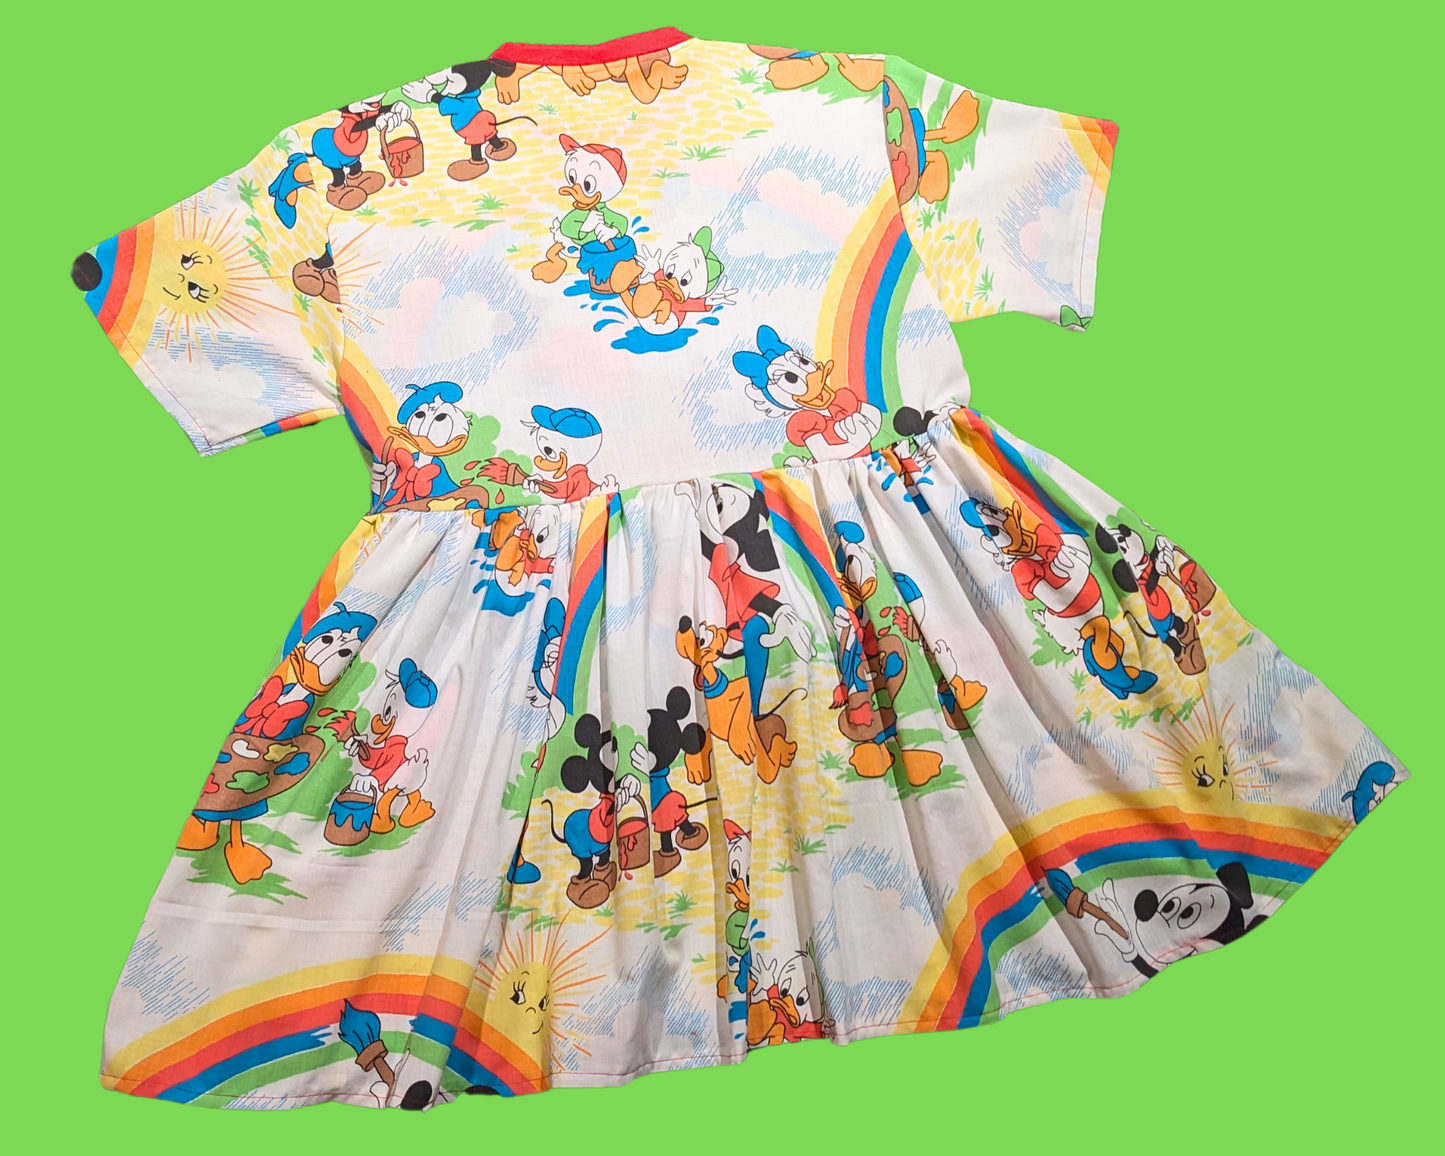 Handmade, Upcycled Walt Disney's Vintage 1980's Mickey Mouse and Friends Painting Bedsheet T-Shirt Dress Fits S-M-L-XL